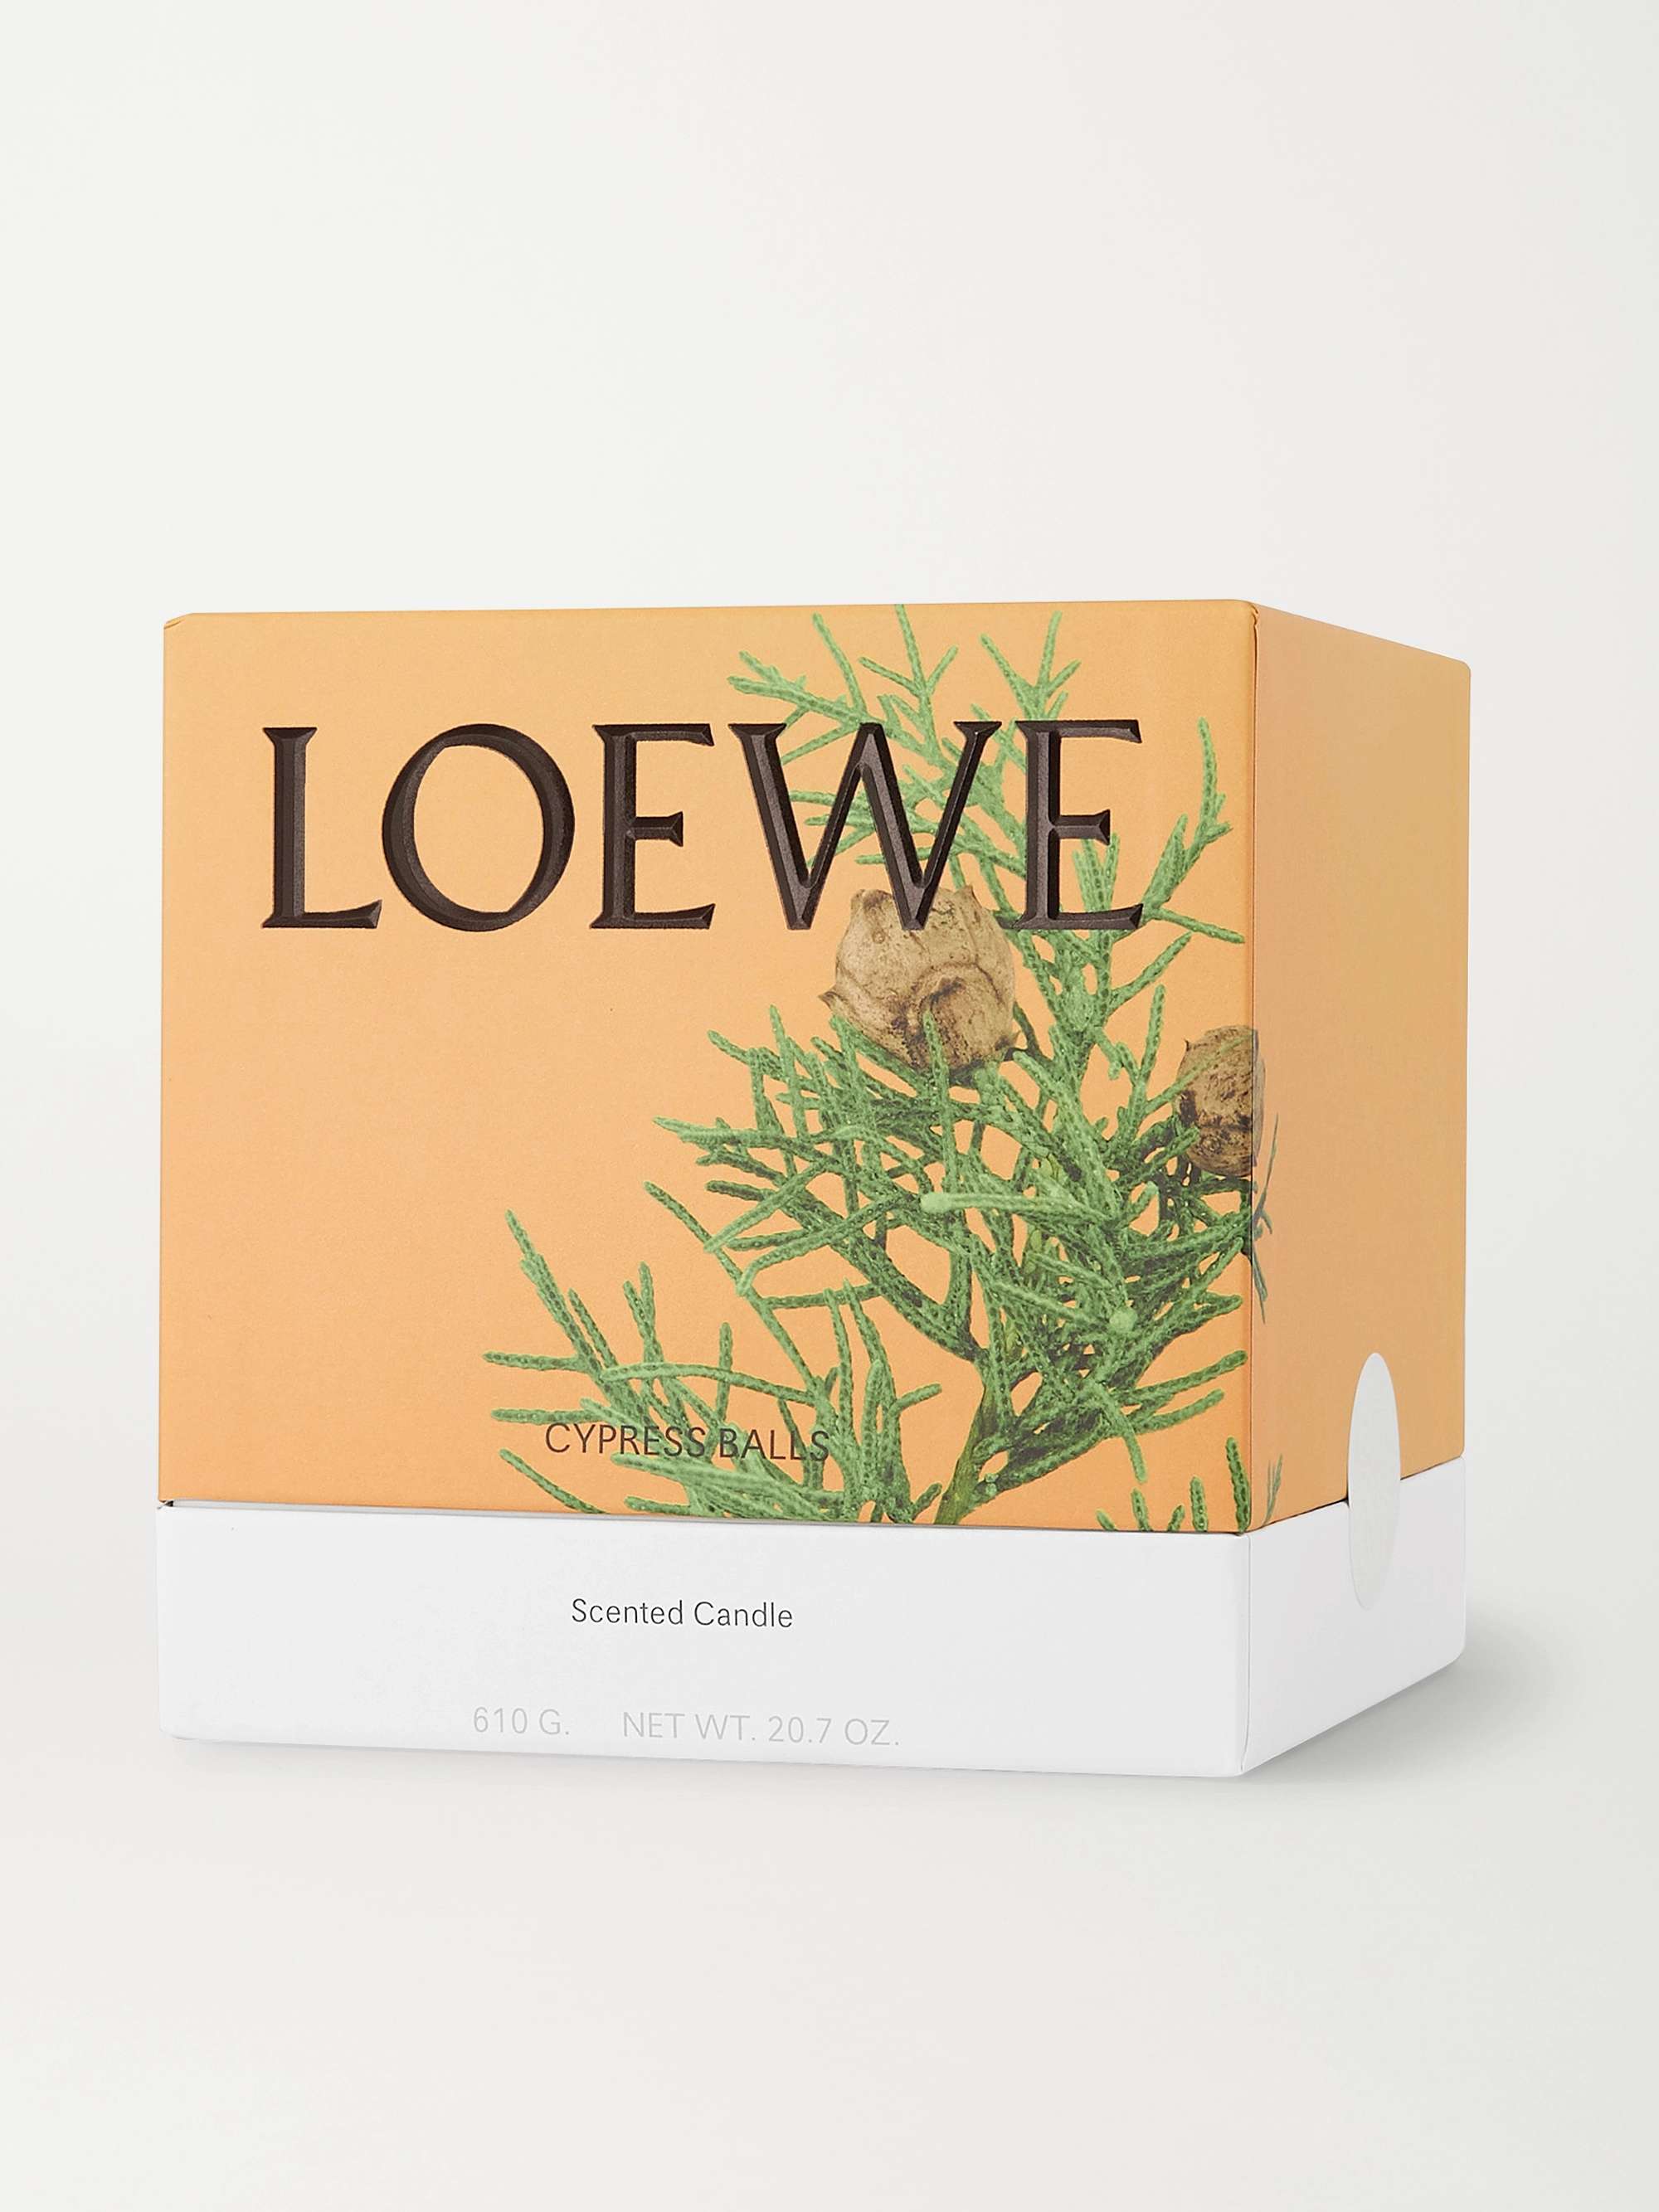 LOEWE HOME SCENTS Cypress Balls Scented Candle, 610g for Men | MR PORTER